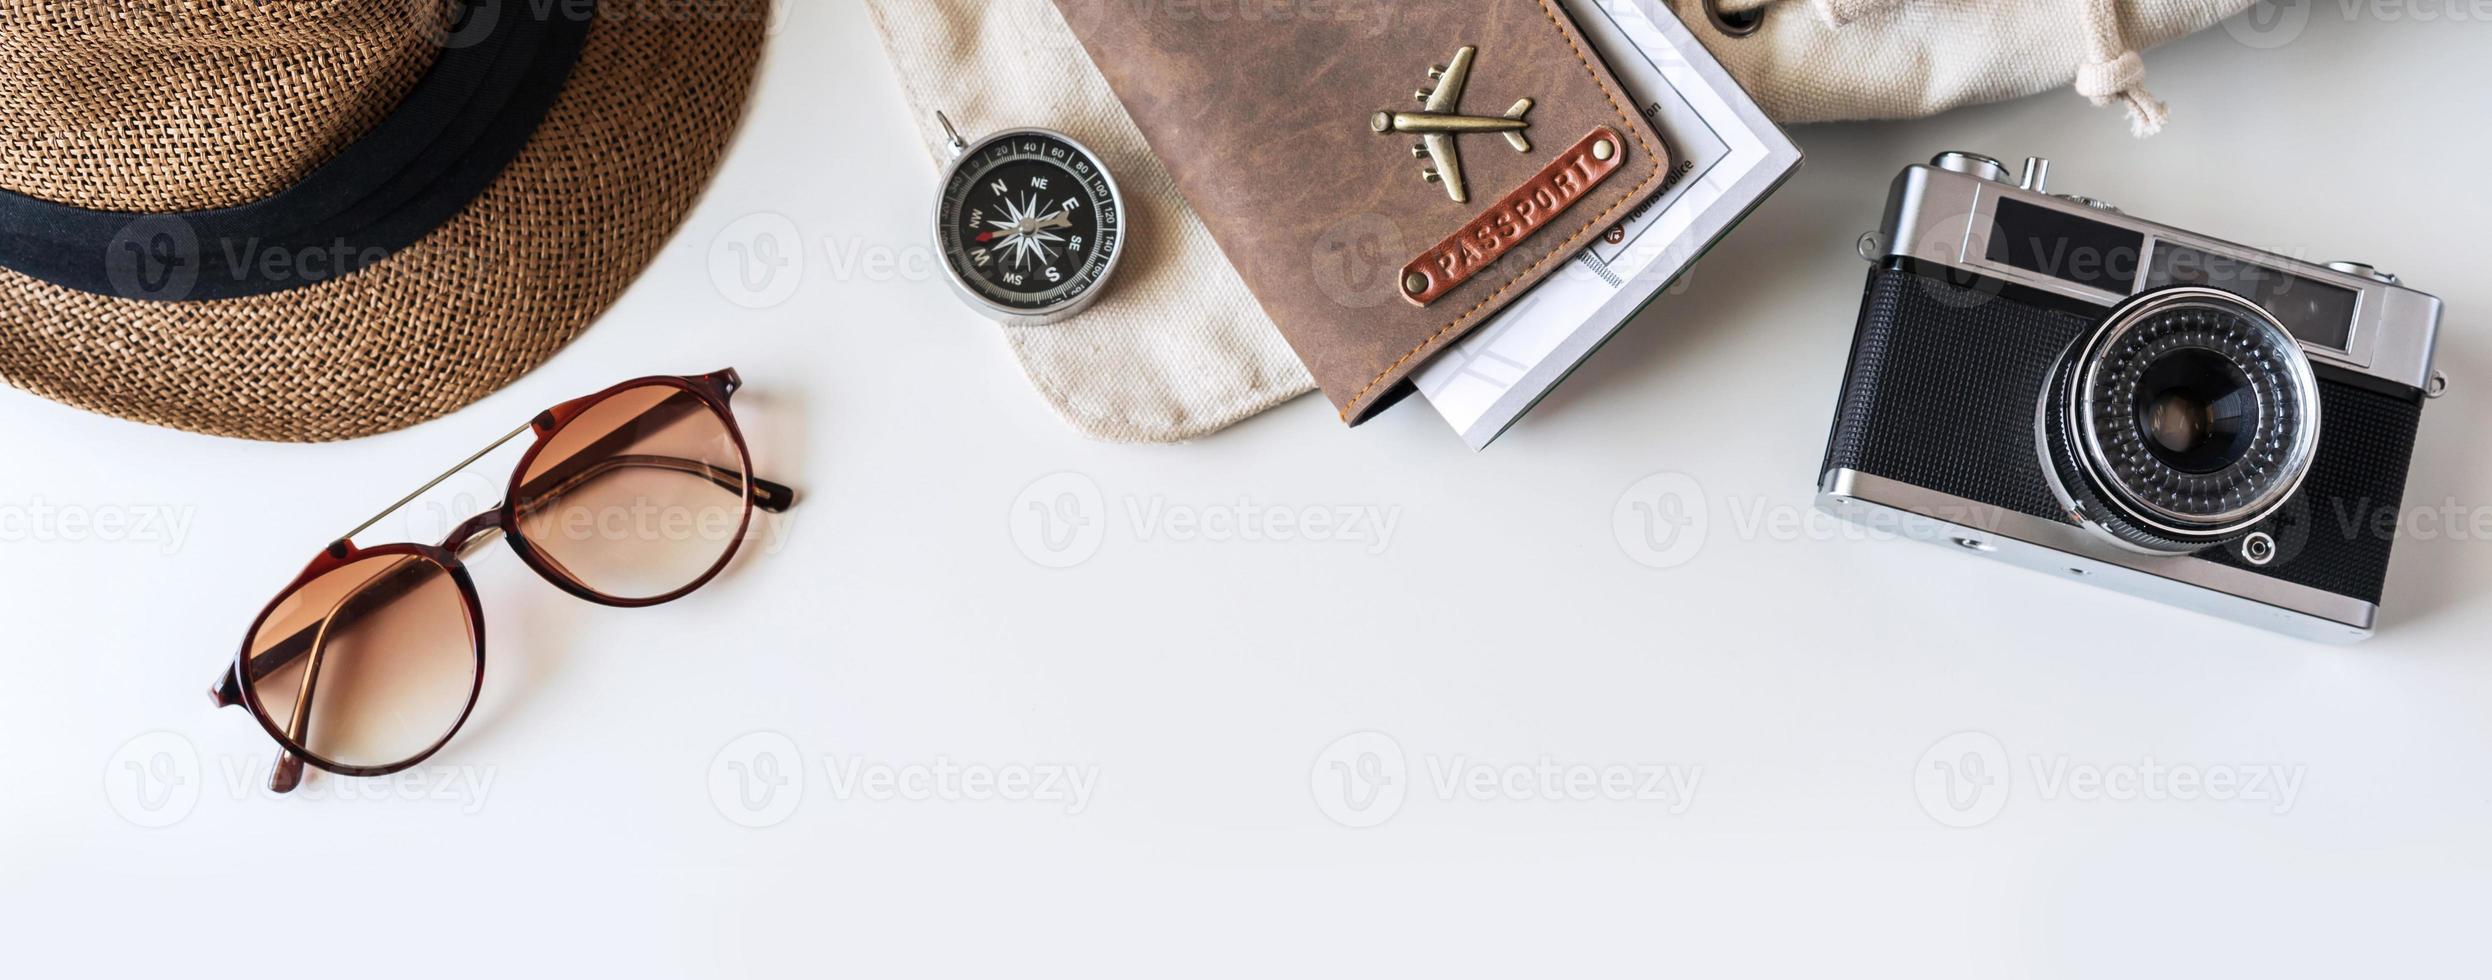 Retro camera with travel accessories and items on white background with copy space, Travel concept, Top view photo